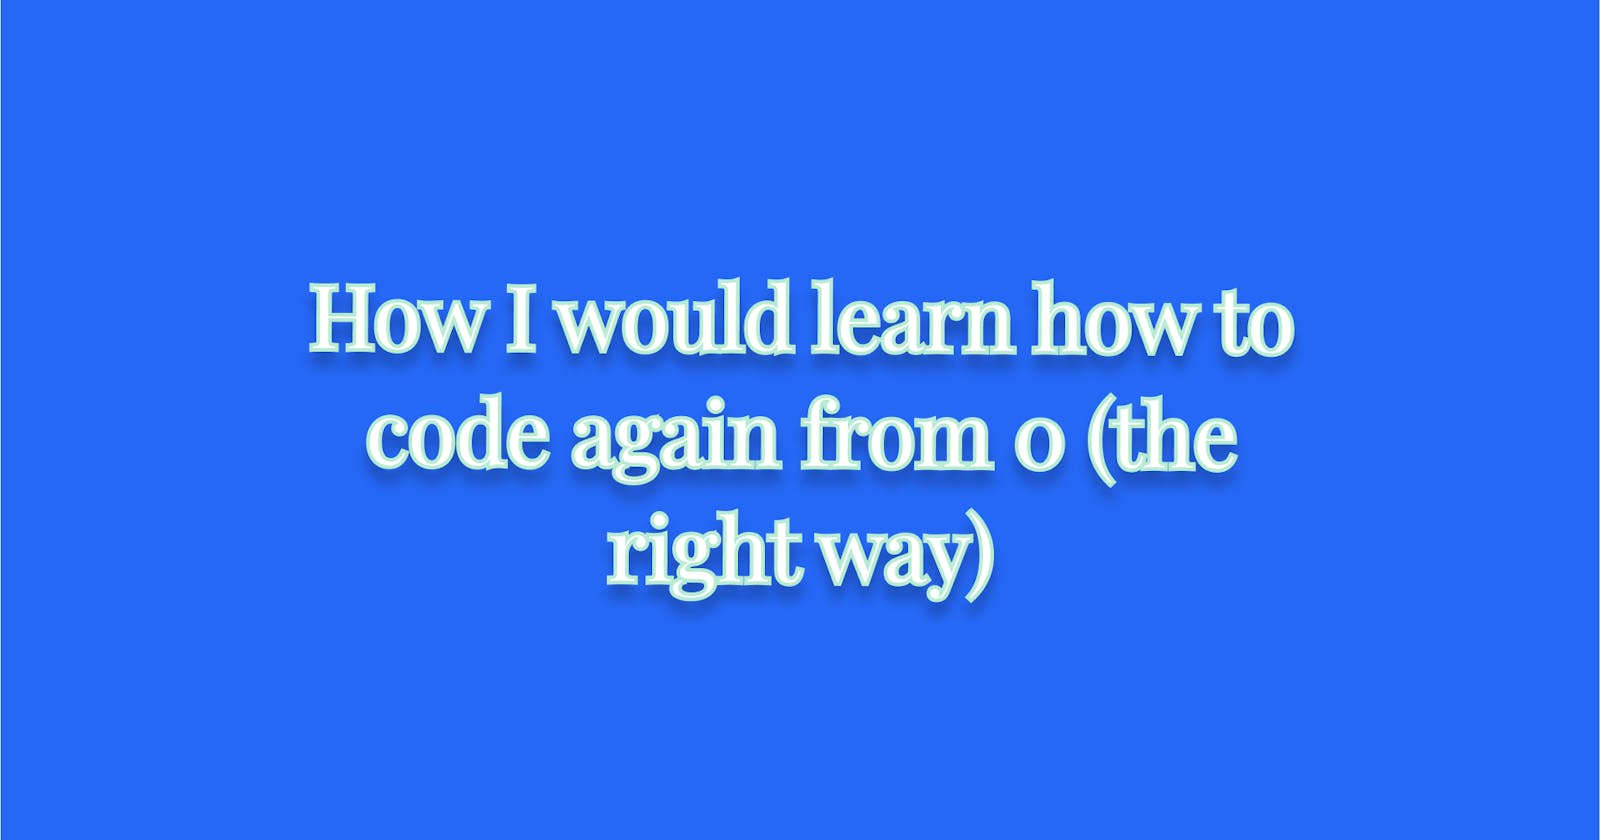 How I would learn how to code again from 0 (the right way)